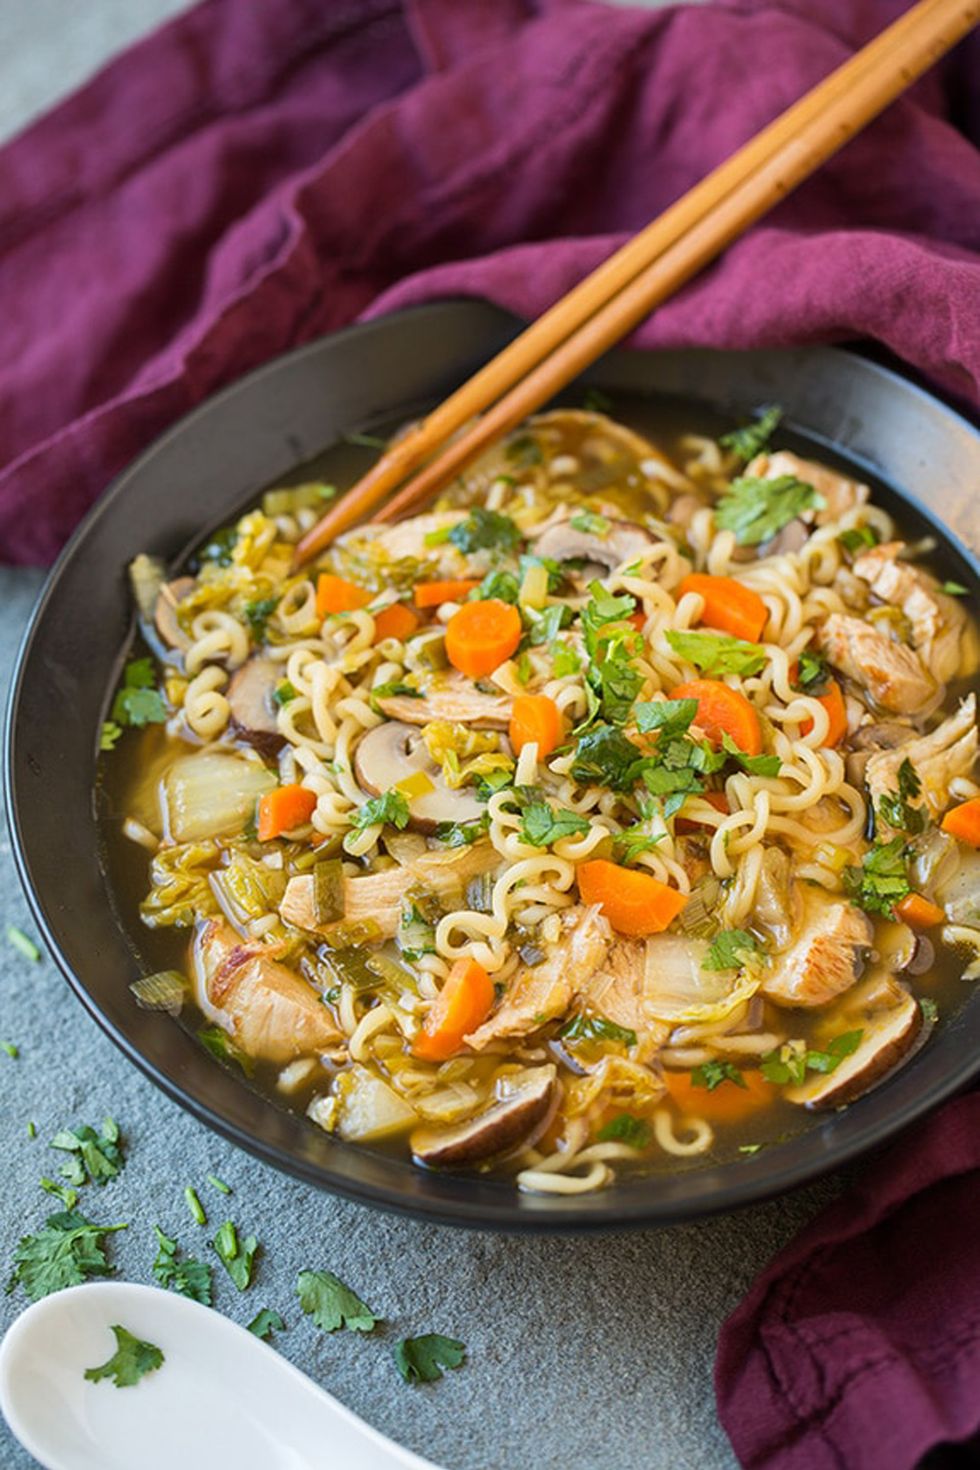 https://hips.hearstapps.com/hmg-prod/images/slow-cooker-chicken-noodle-soup-asian-1529528998.jpg?crop=1xw:0.9993337774816788xh;center,top&resize=980:*